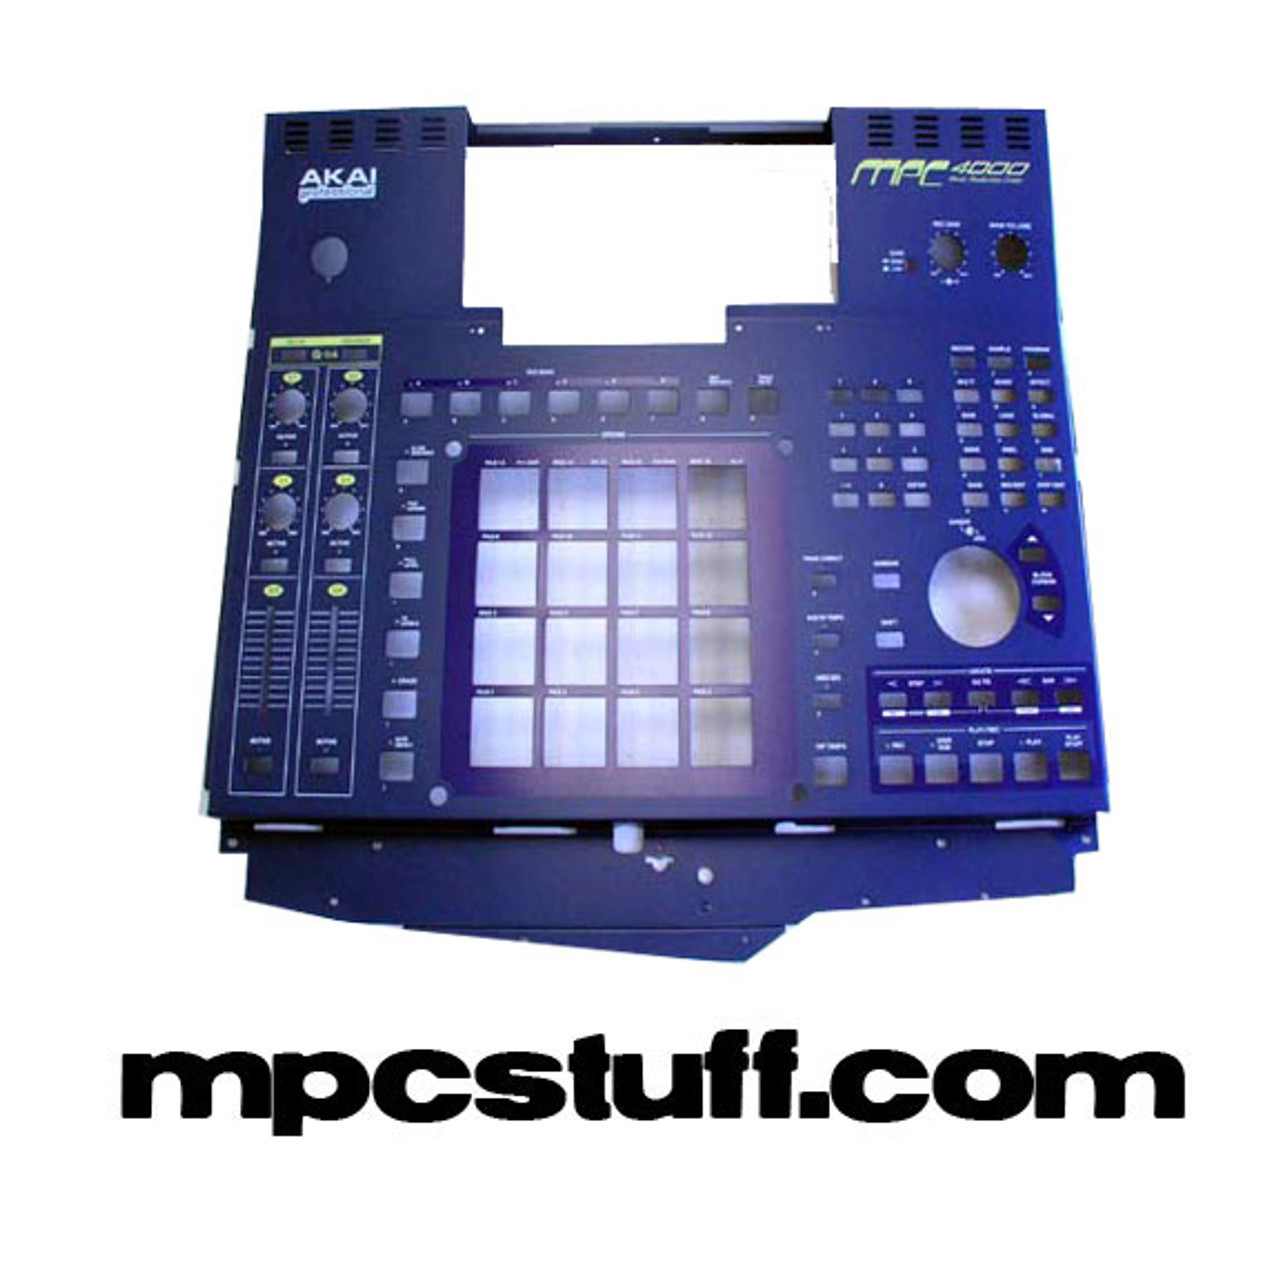 MPC 4000 Casing (White or Blue)